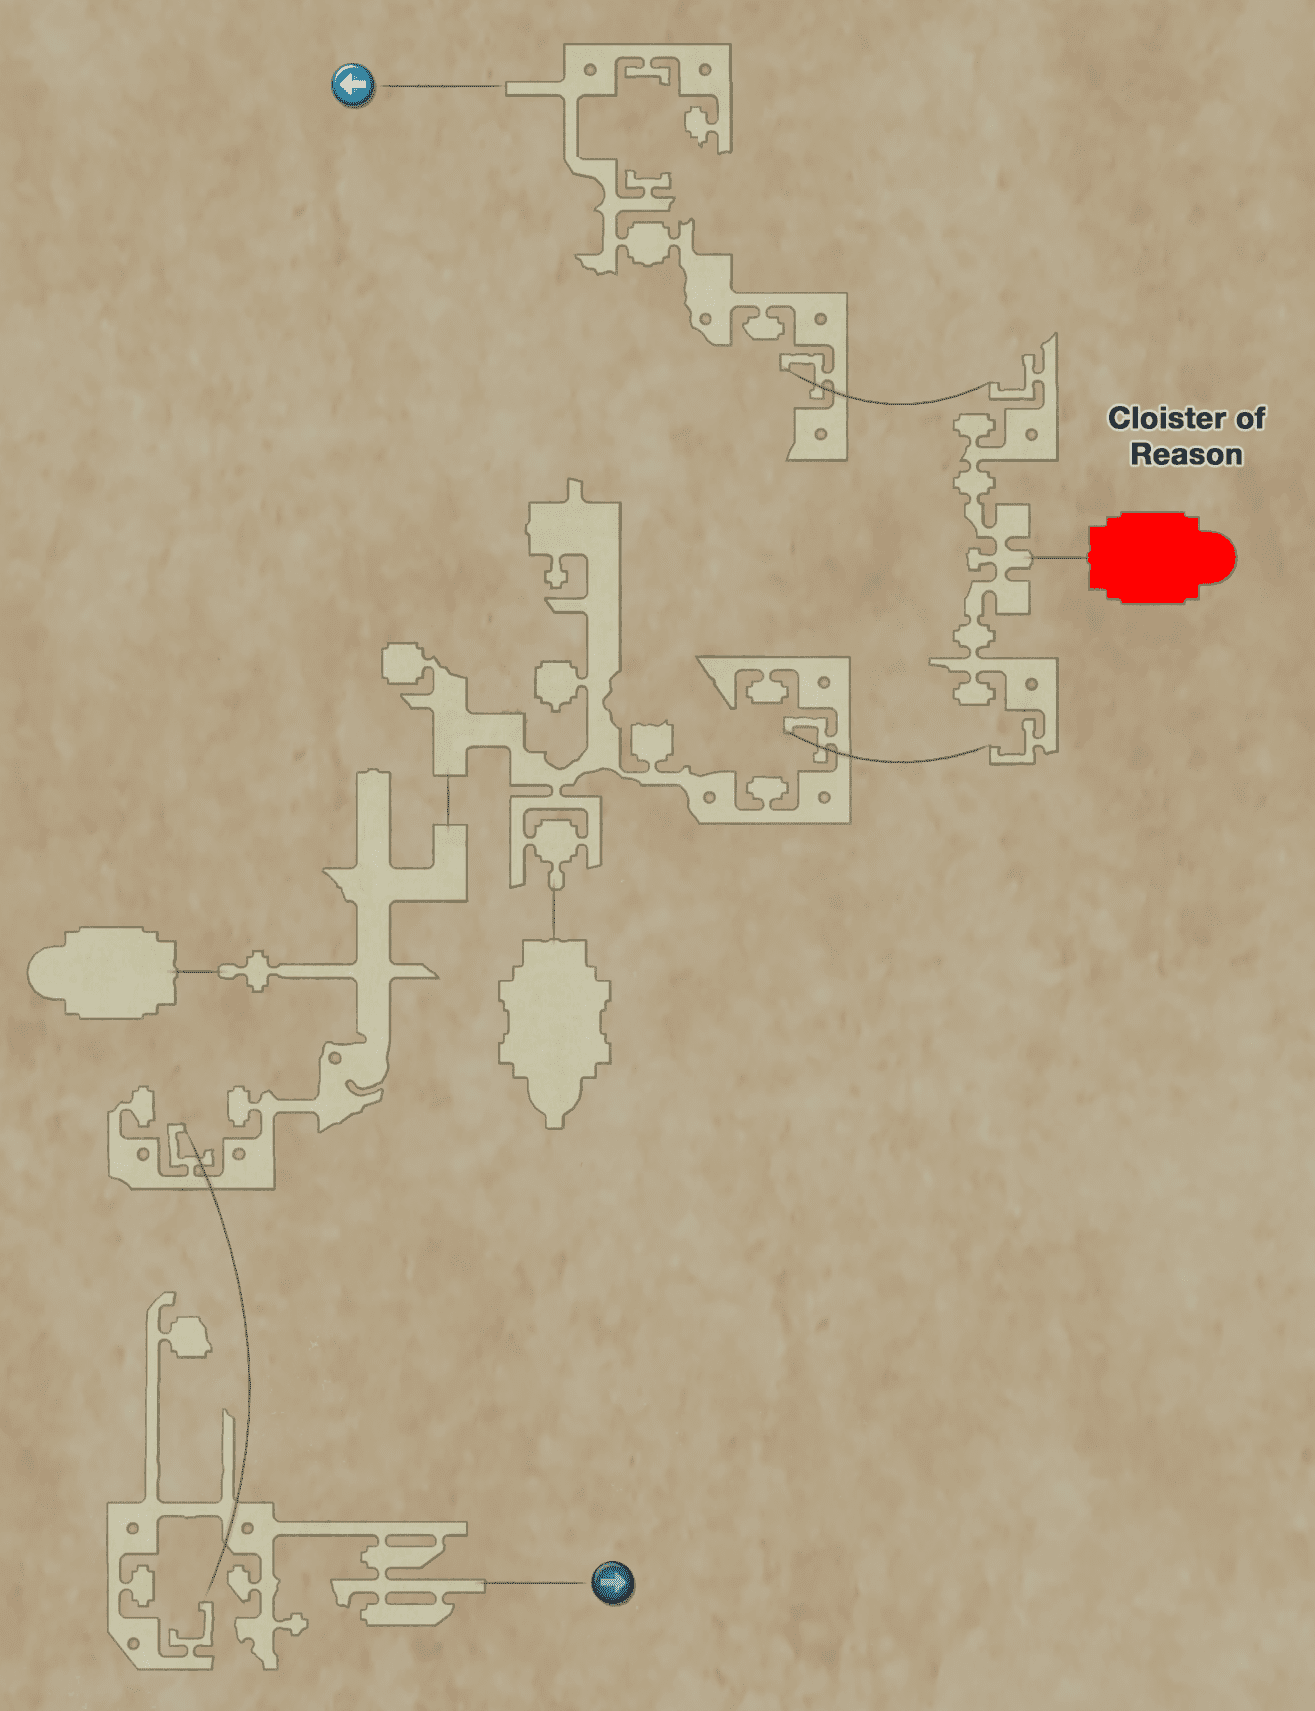 Map of the Necrohol of Nabudis with the Cloister of Reason - Fury location pointed out